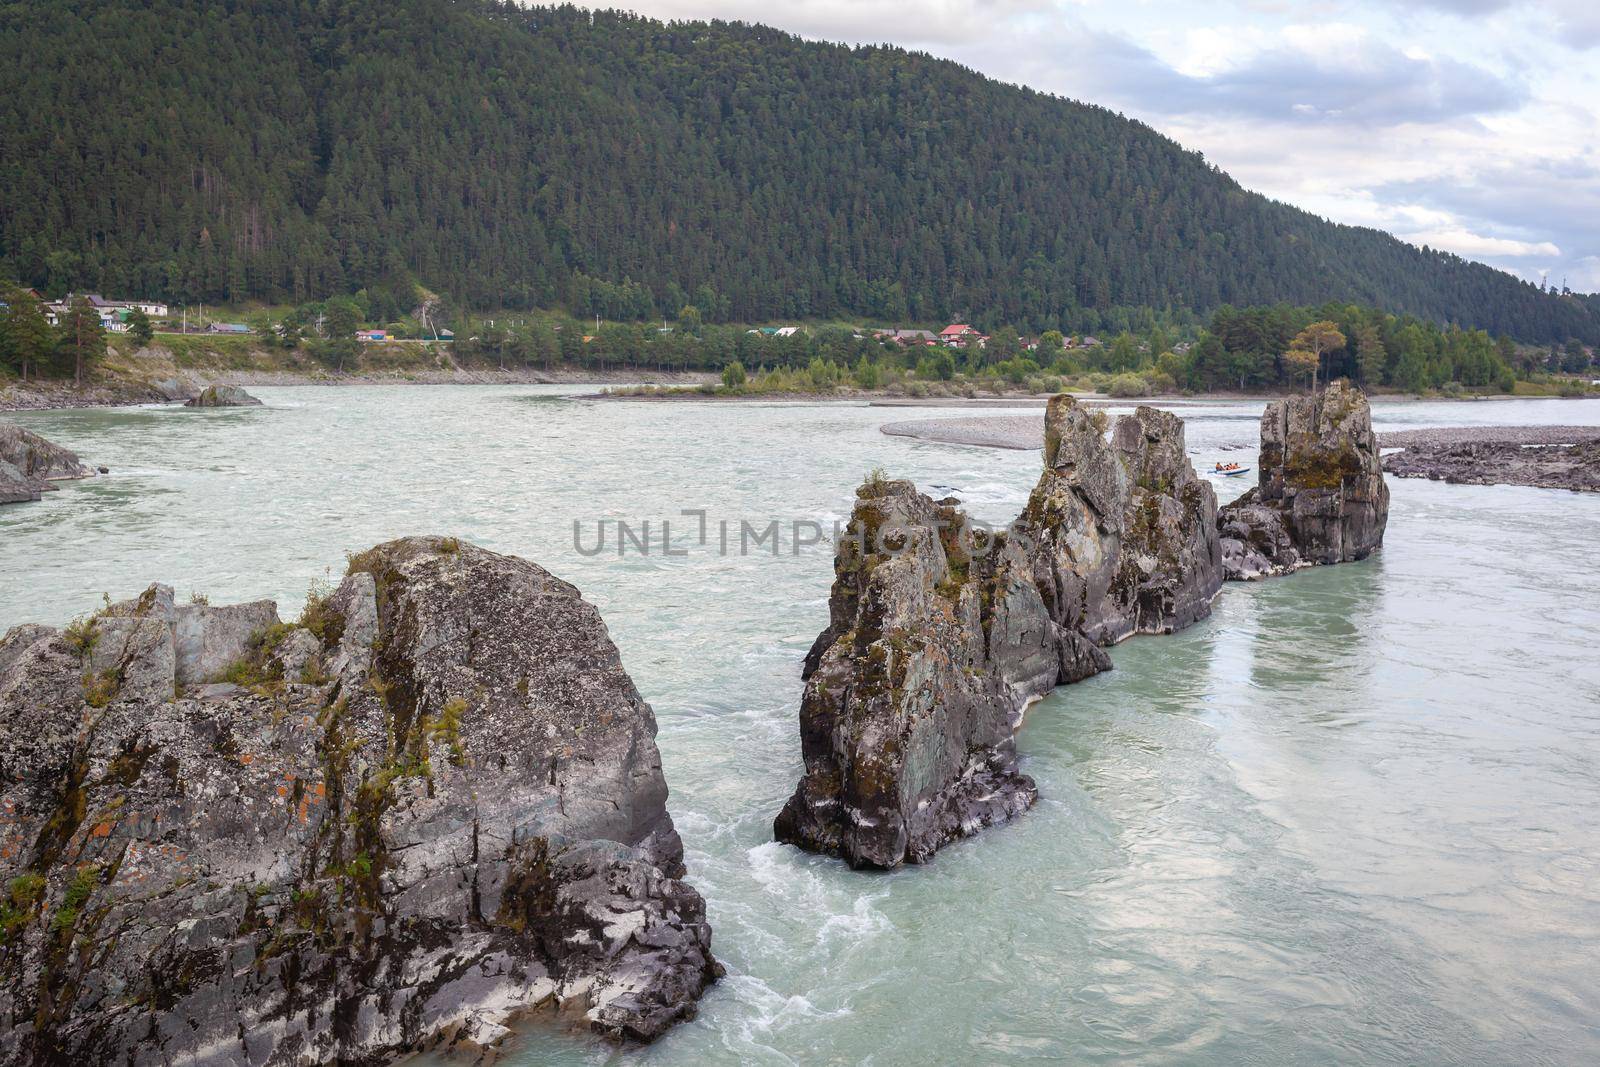 A fast-flowing wide and full-flowing mountain river. Large rocks stick out of the water. Big mountain river Katun, turquoise color, in the Altai Mountains, Altai Republic. Place the Dragon's Teeth.